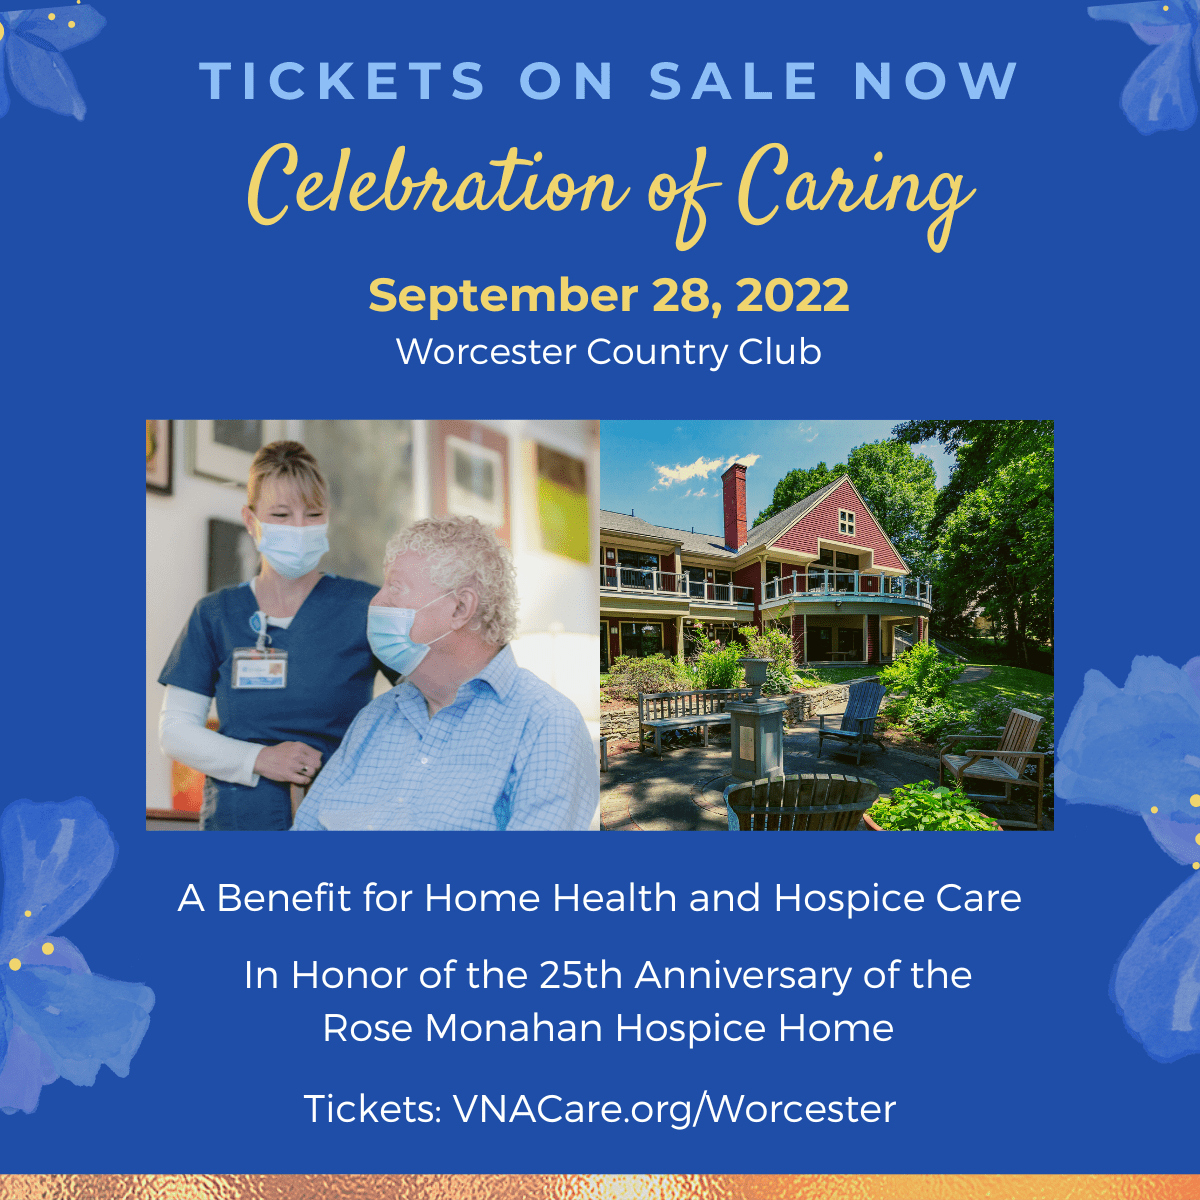 Celebration of Caring to benefit VNA Care, honor 25th anniversary of Rose Monahan Hospice Home